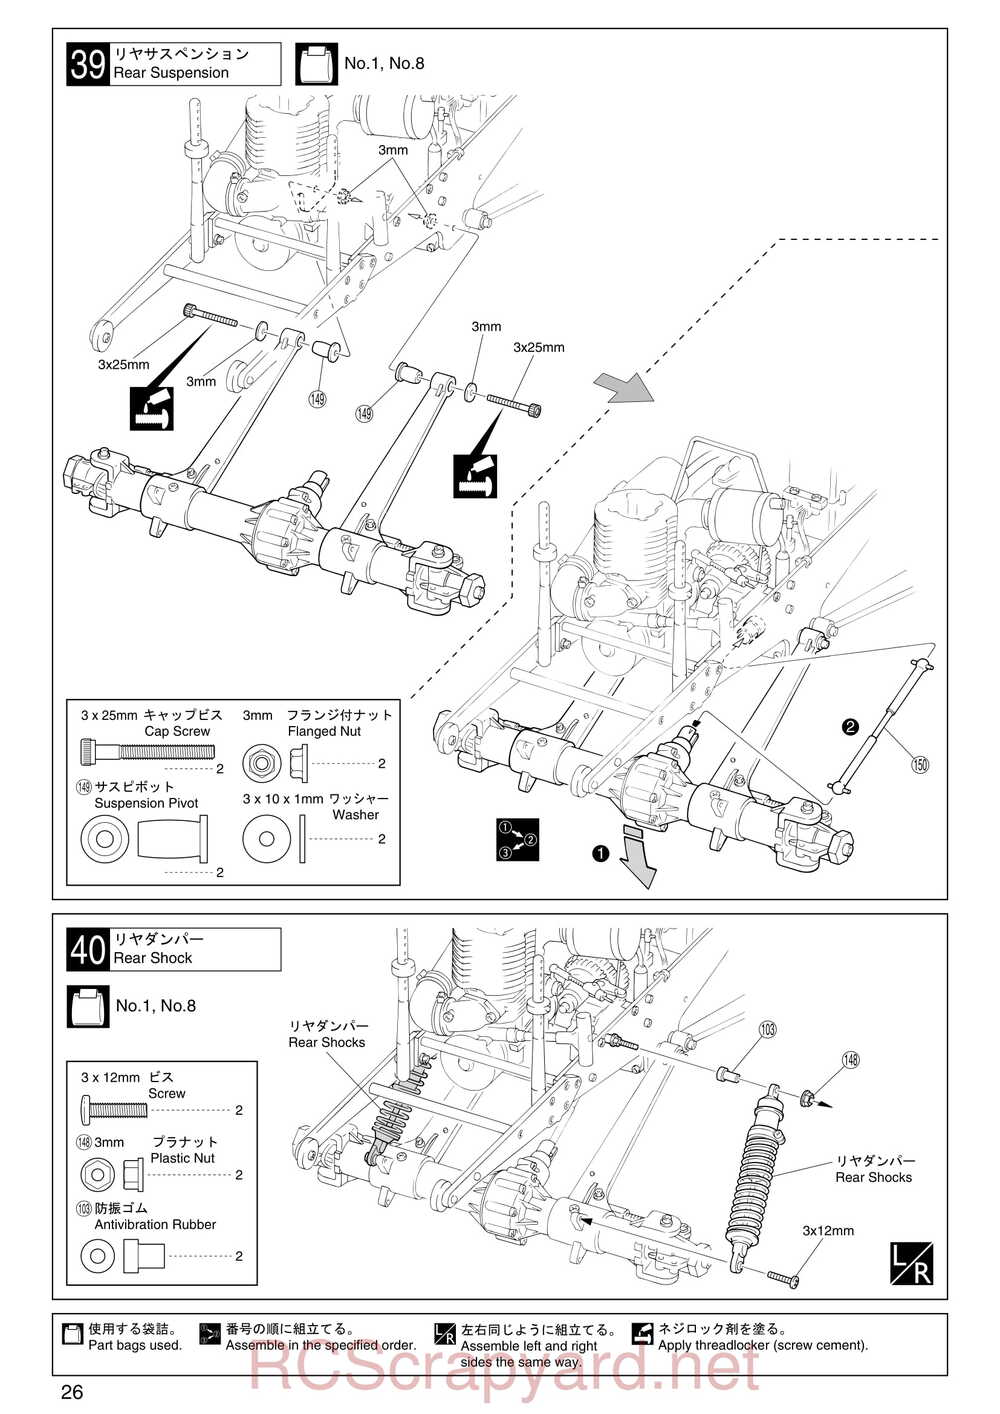 Kyosho - 31224 - Mad-Armour - Manual - Page 26